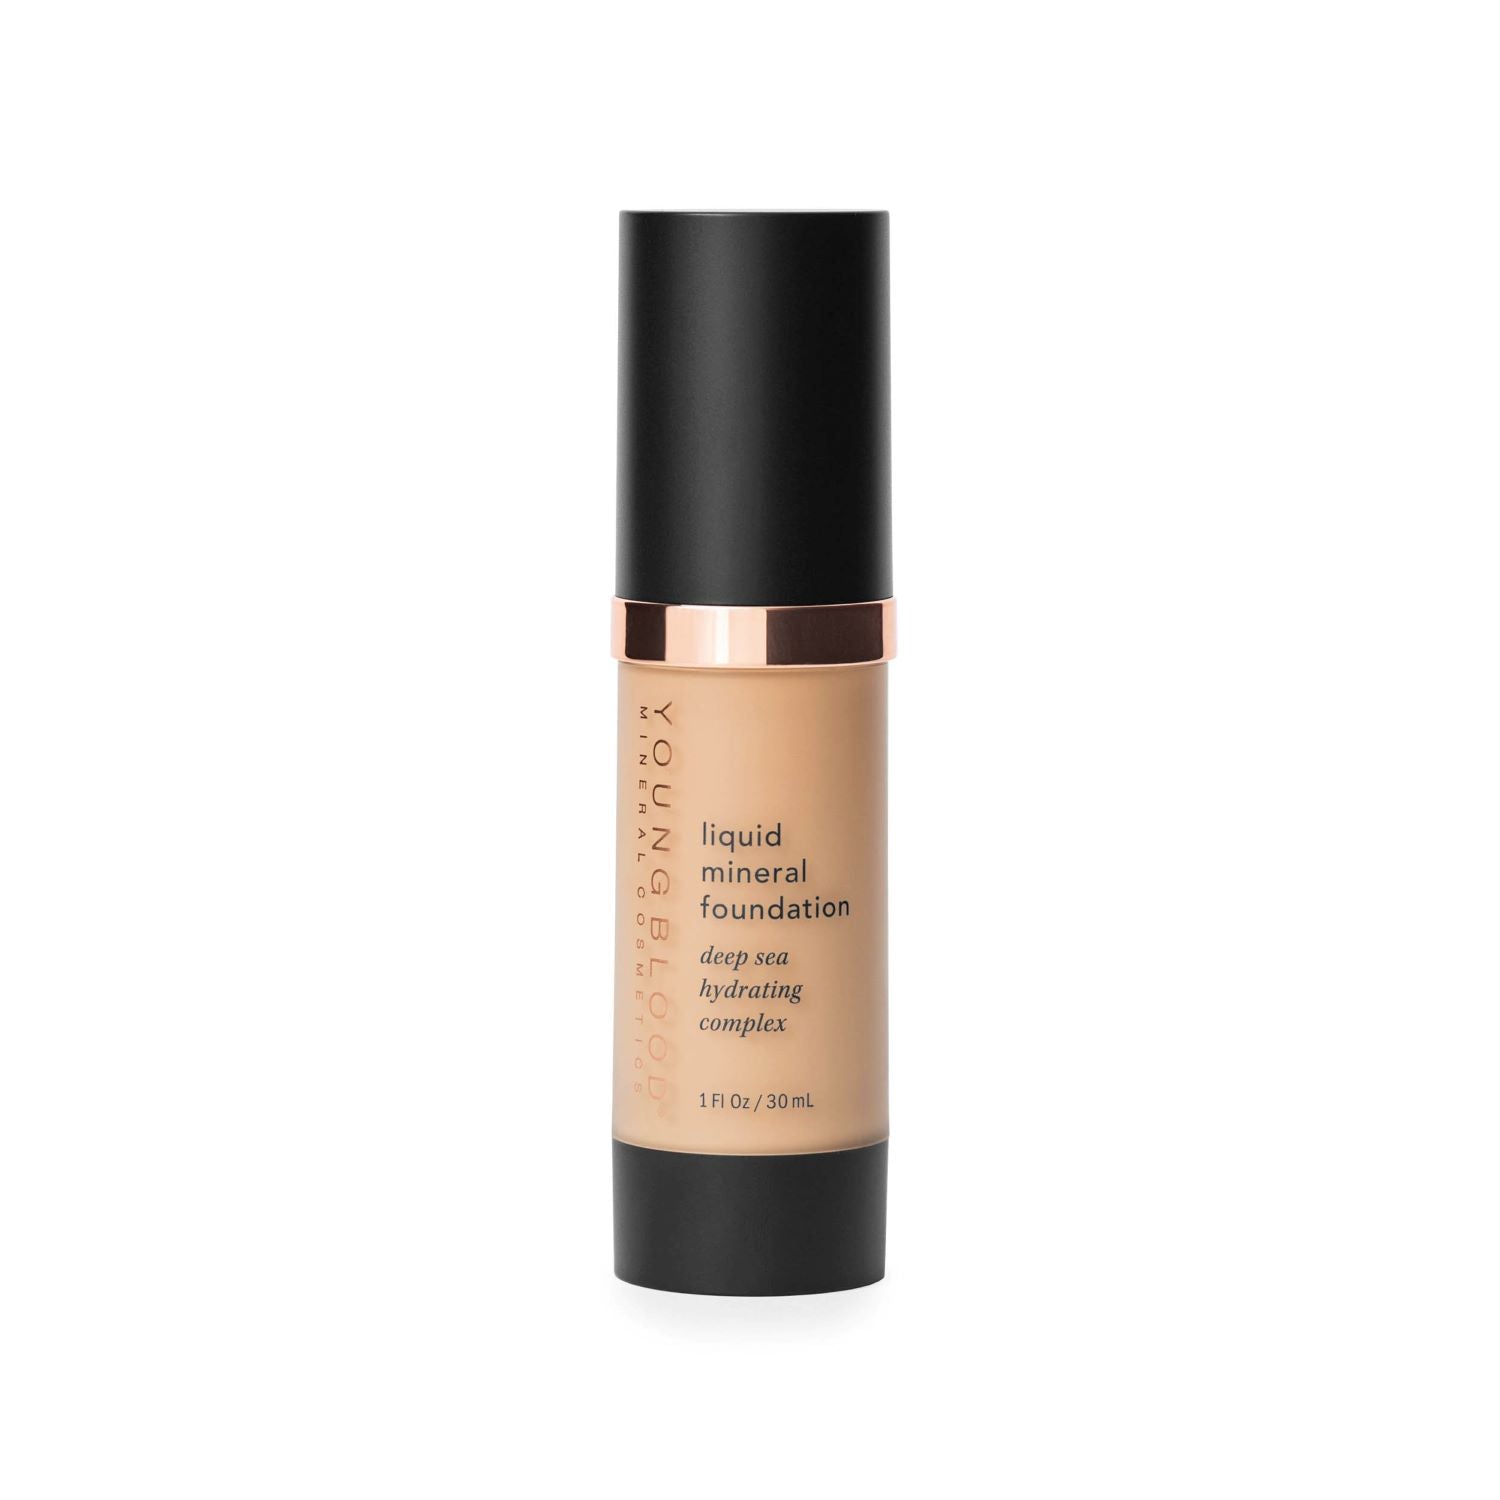 Youngblood Liquid Mineral Foundation with Deep Sea Hydrating Complex / CAPRI